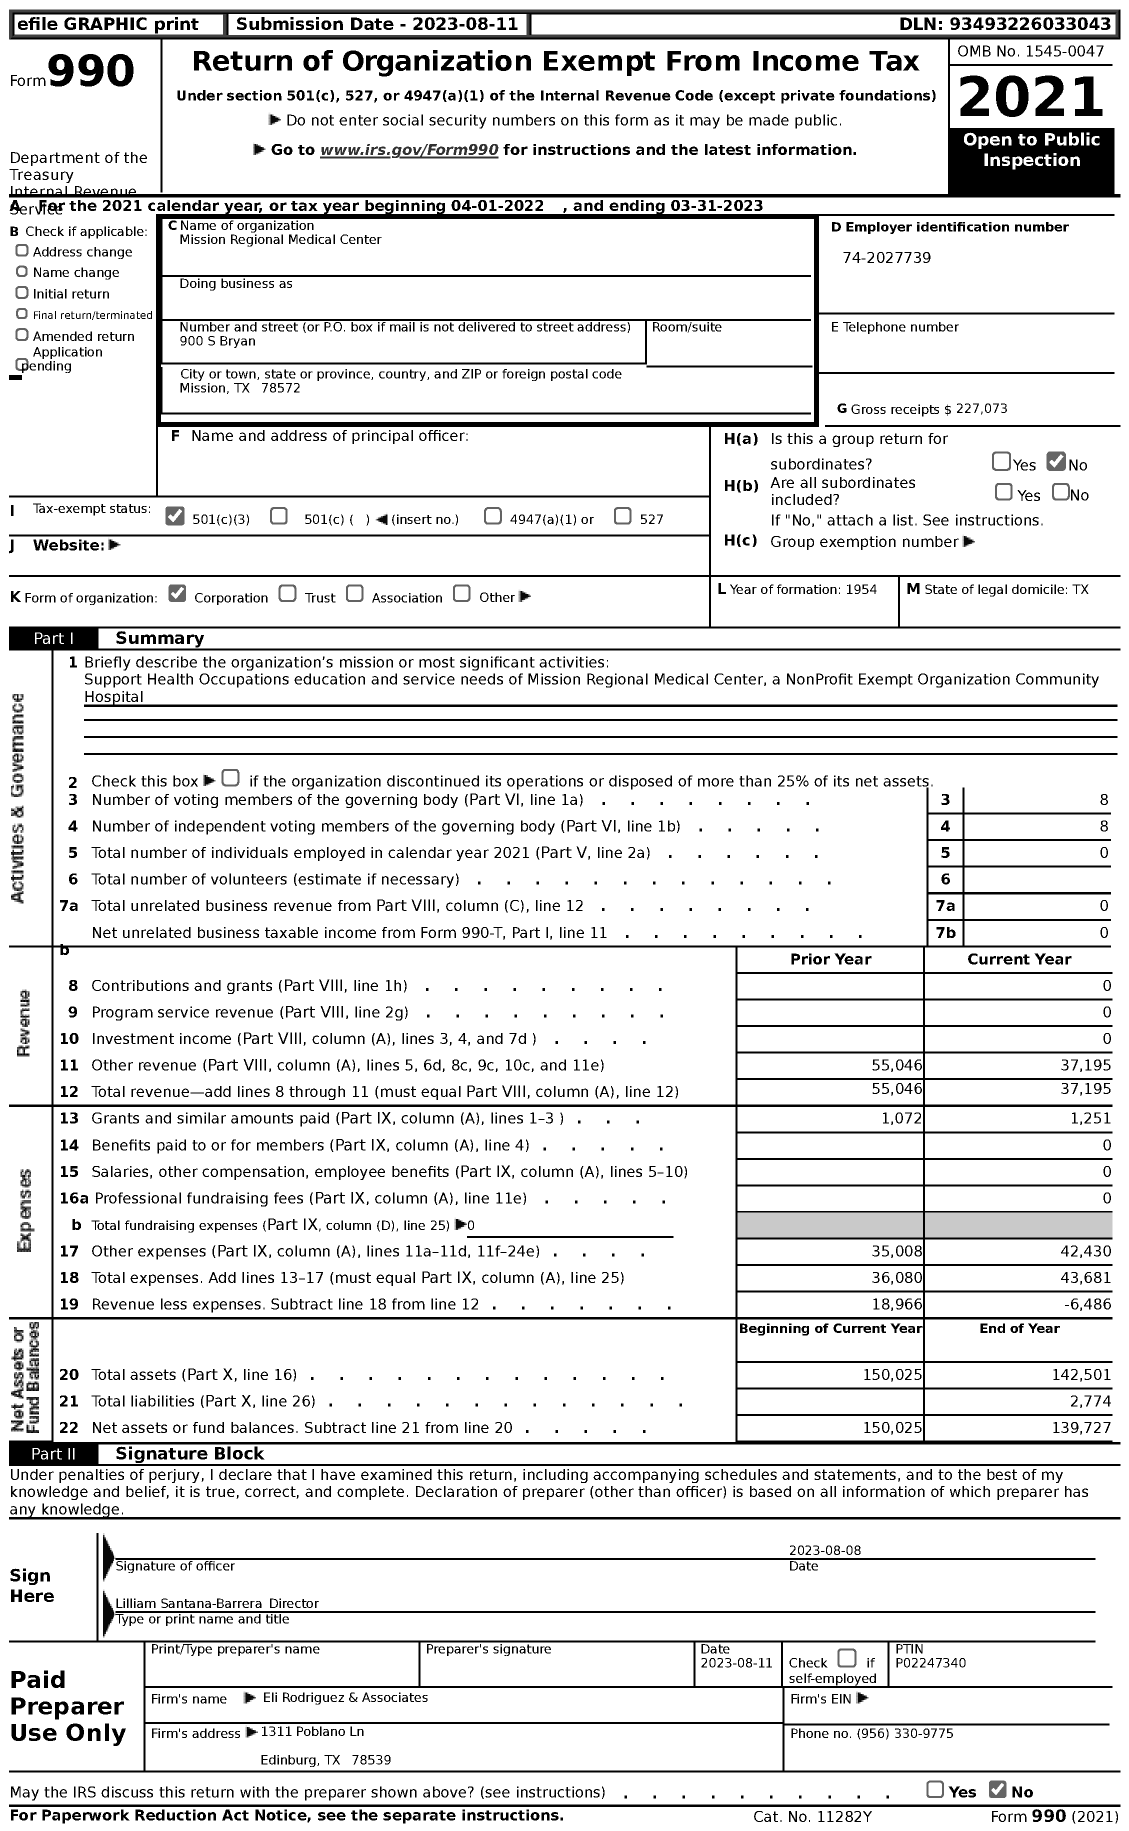 Image of first page of 2022 Form 990 for Mission Regional Medical Center